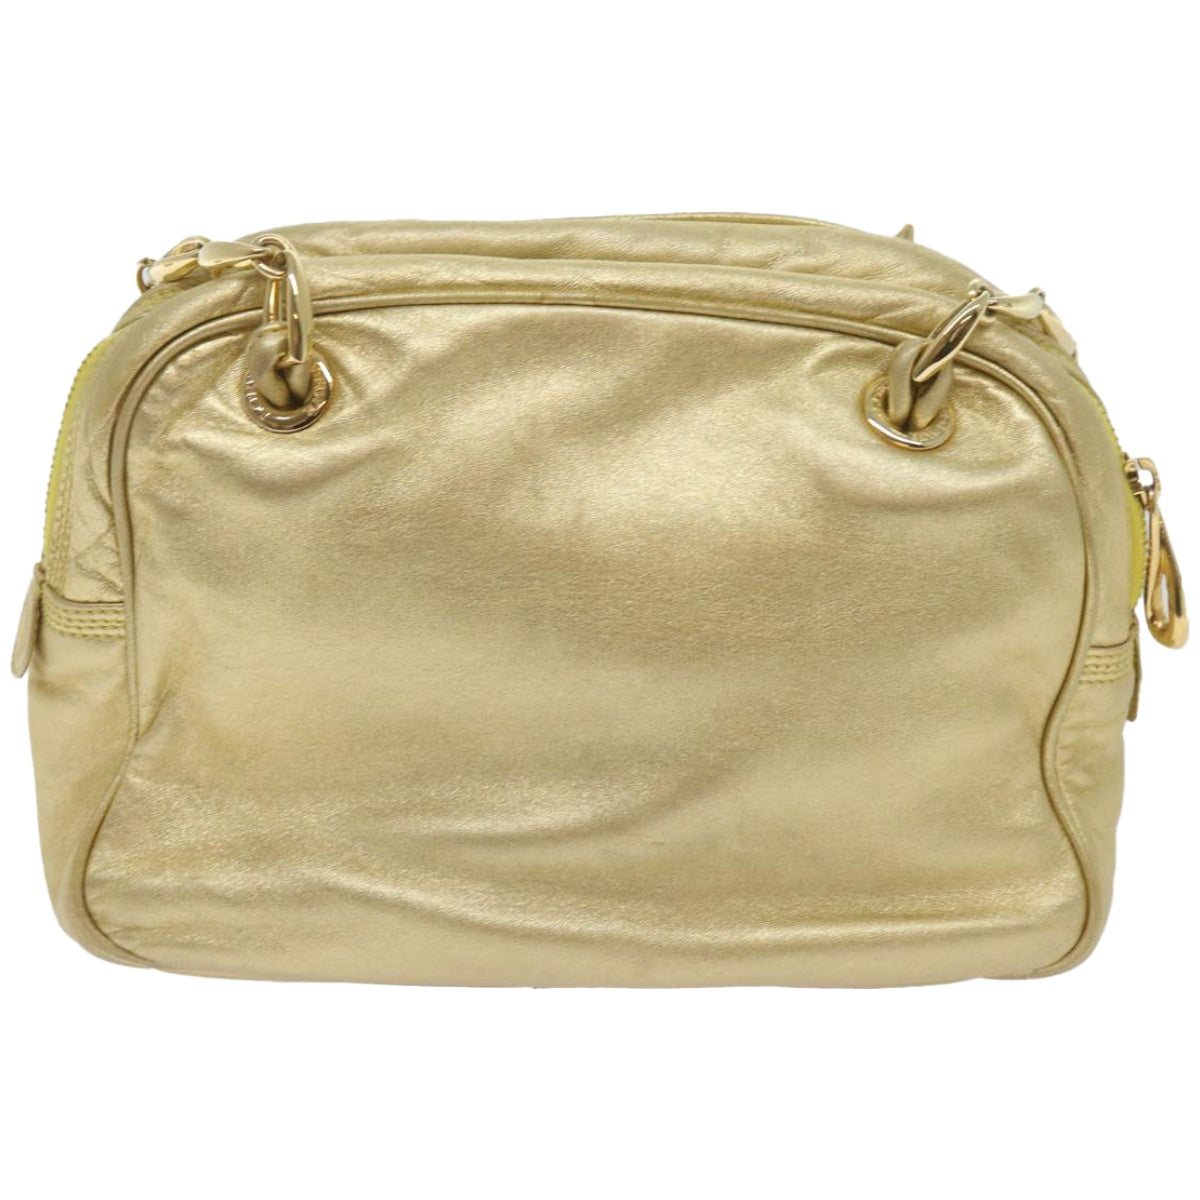 LOEWE Chain Shoulder Bag Leather Gold Tone Auth 67443 - 0